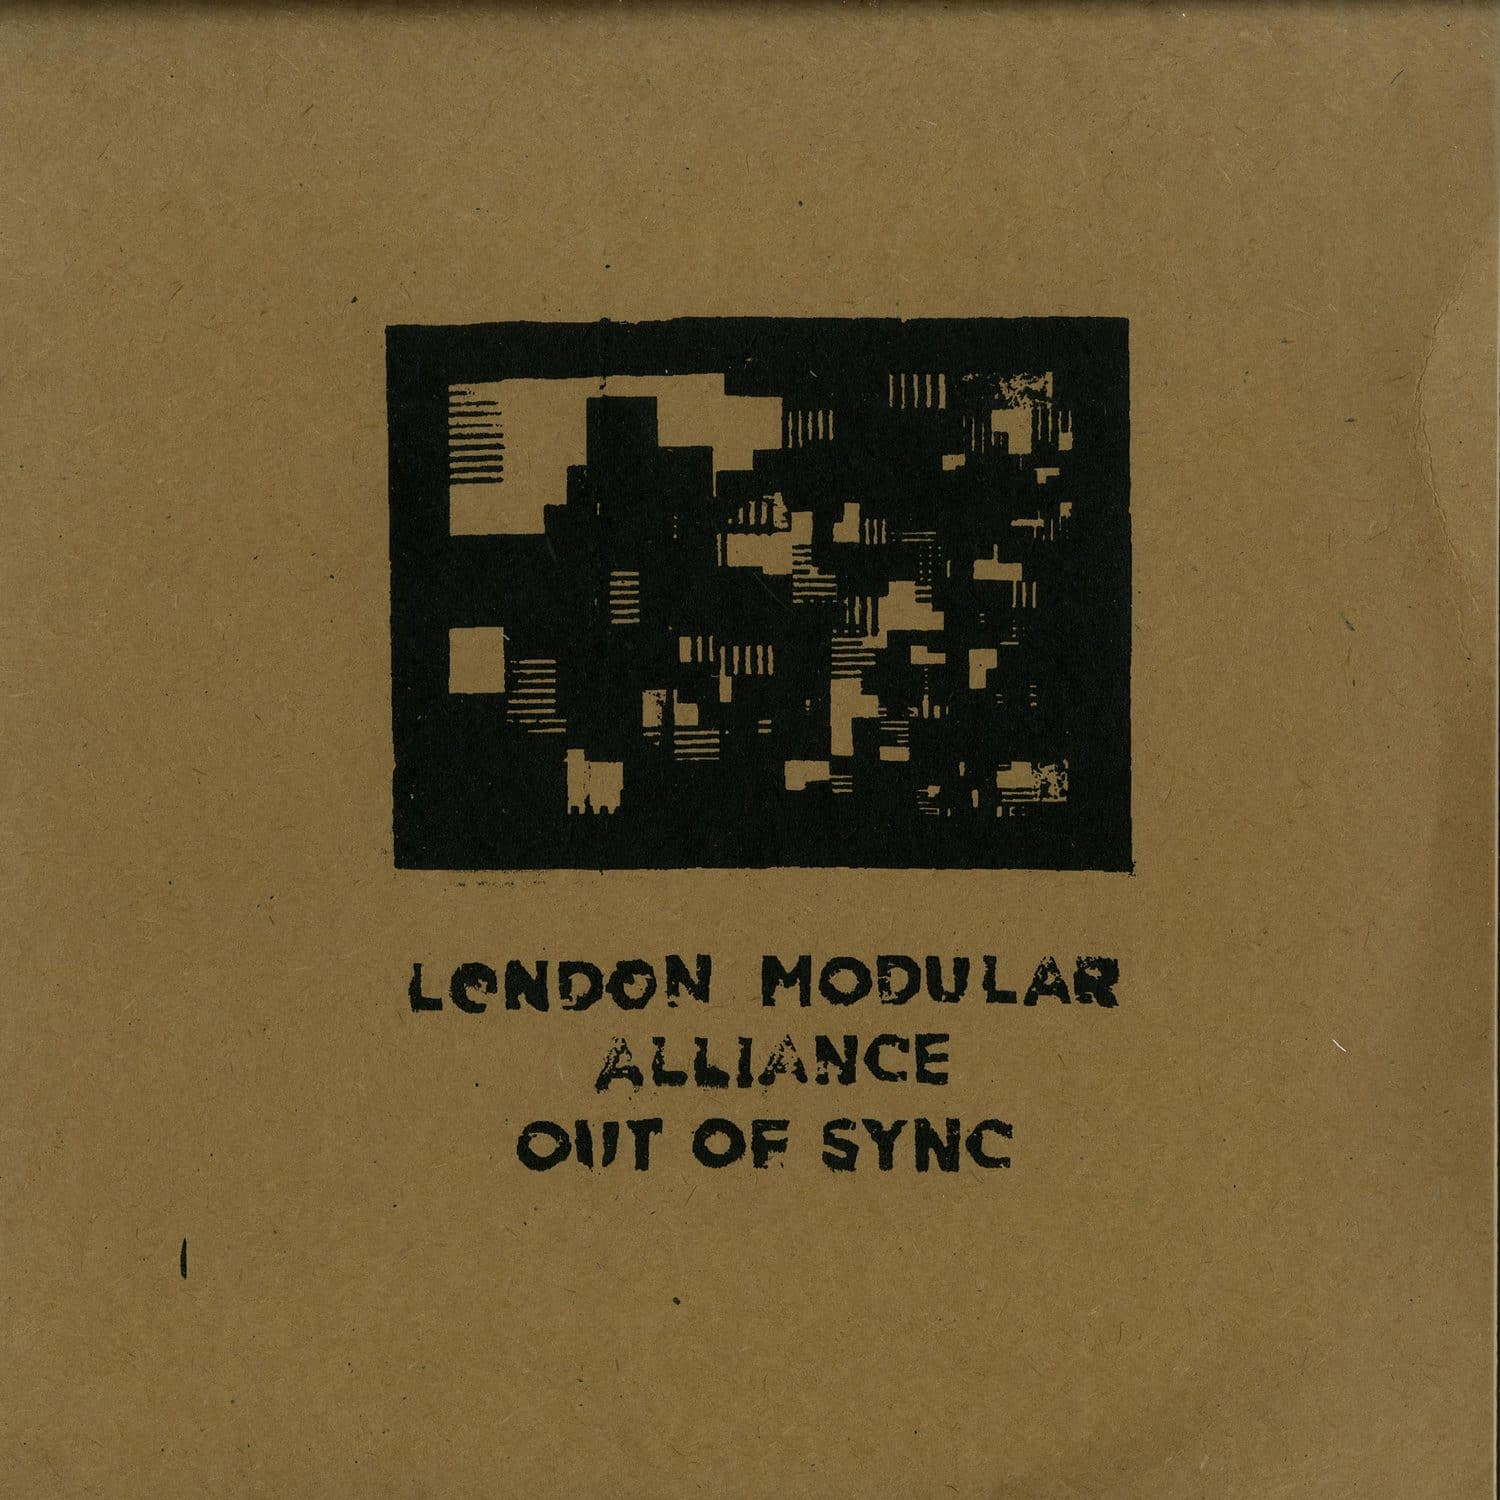 London Modular Alliance - OUT OF SYNC